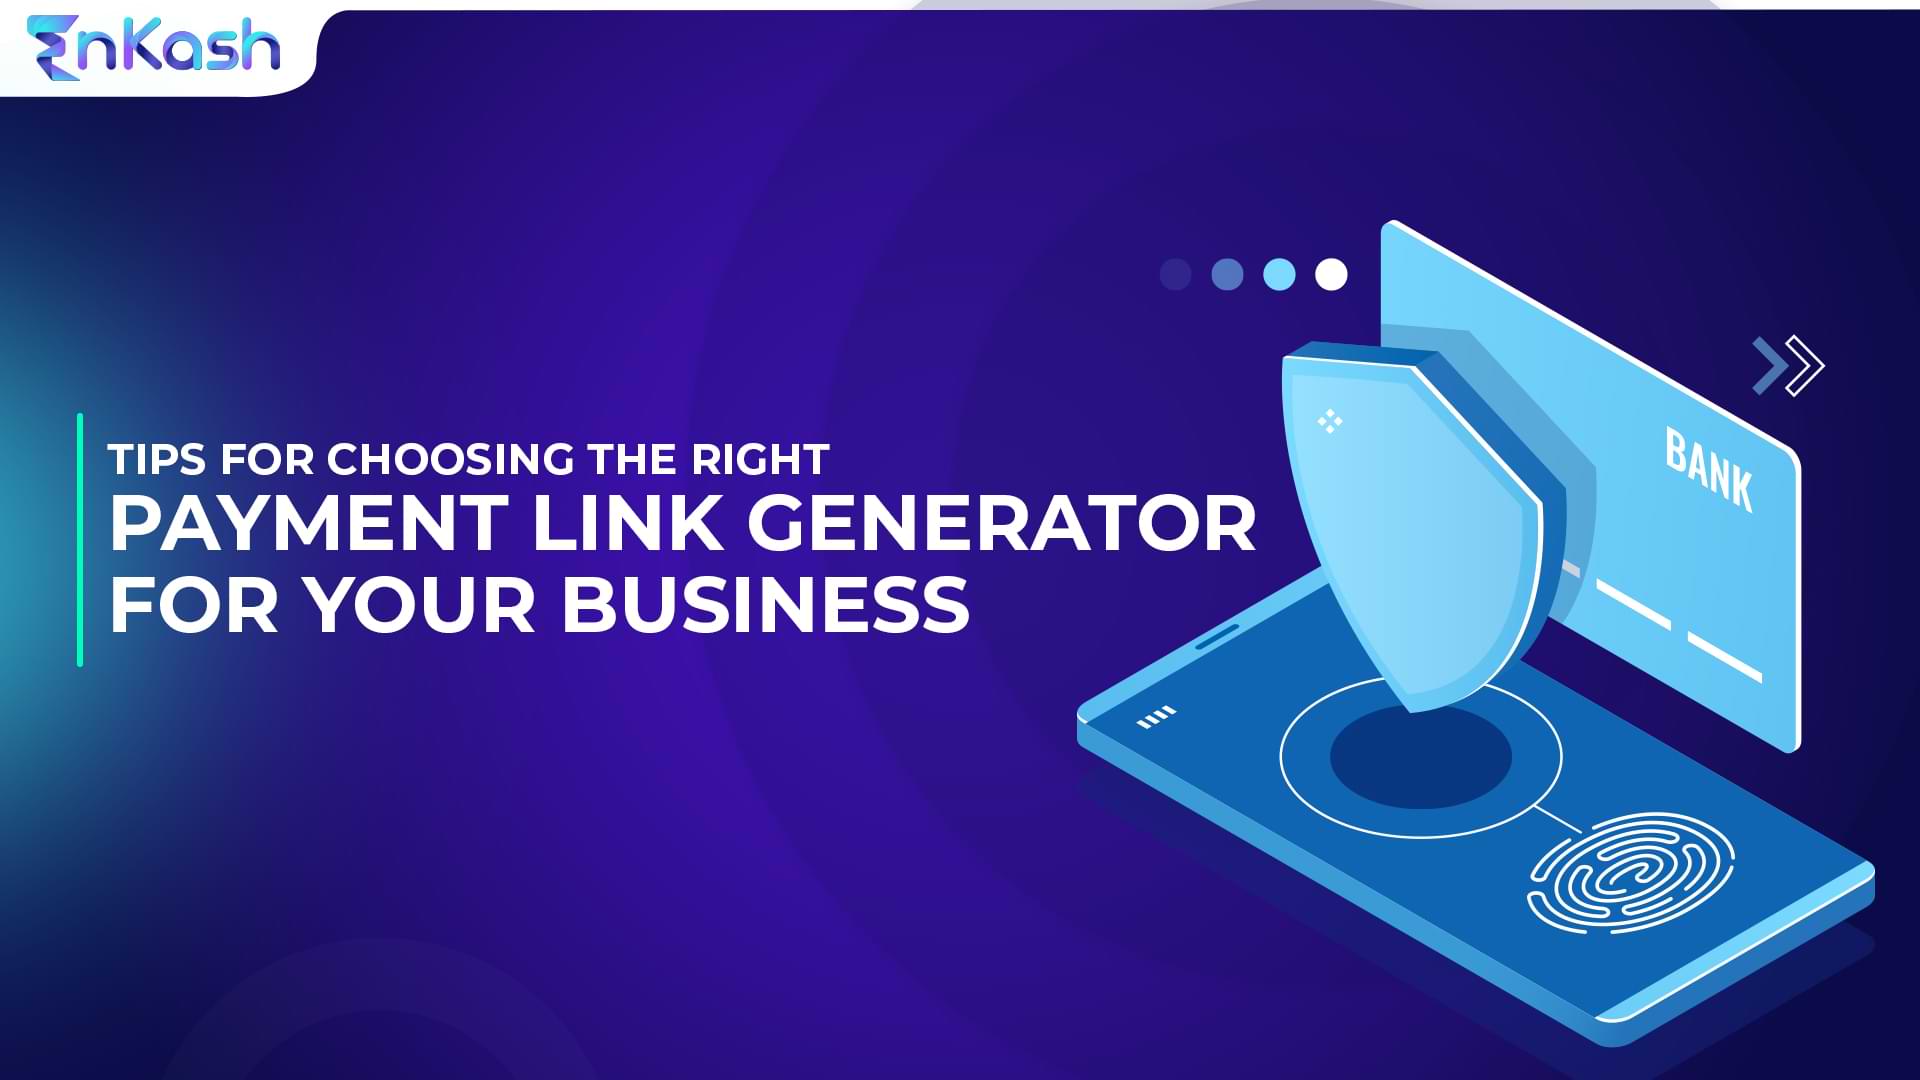 Tips for choosing the right payment link generator